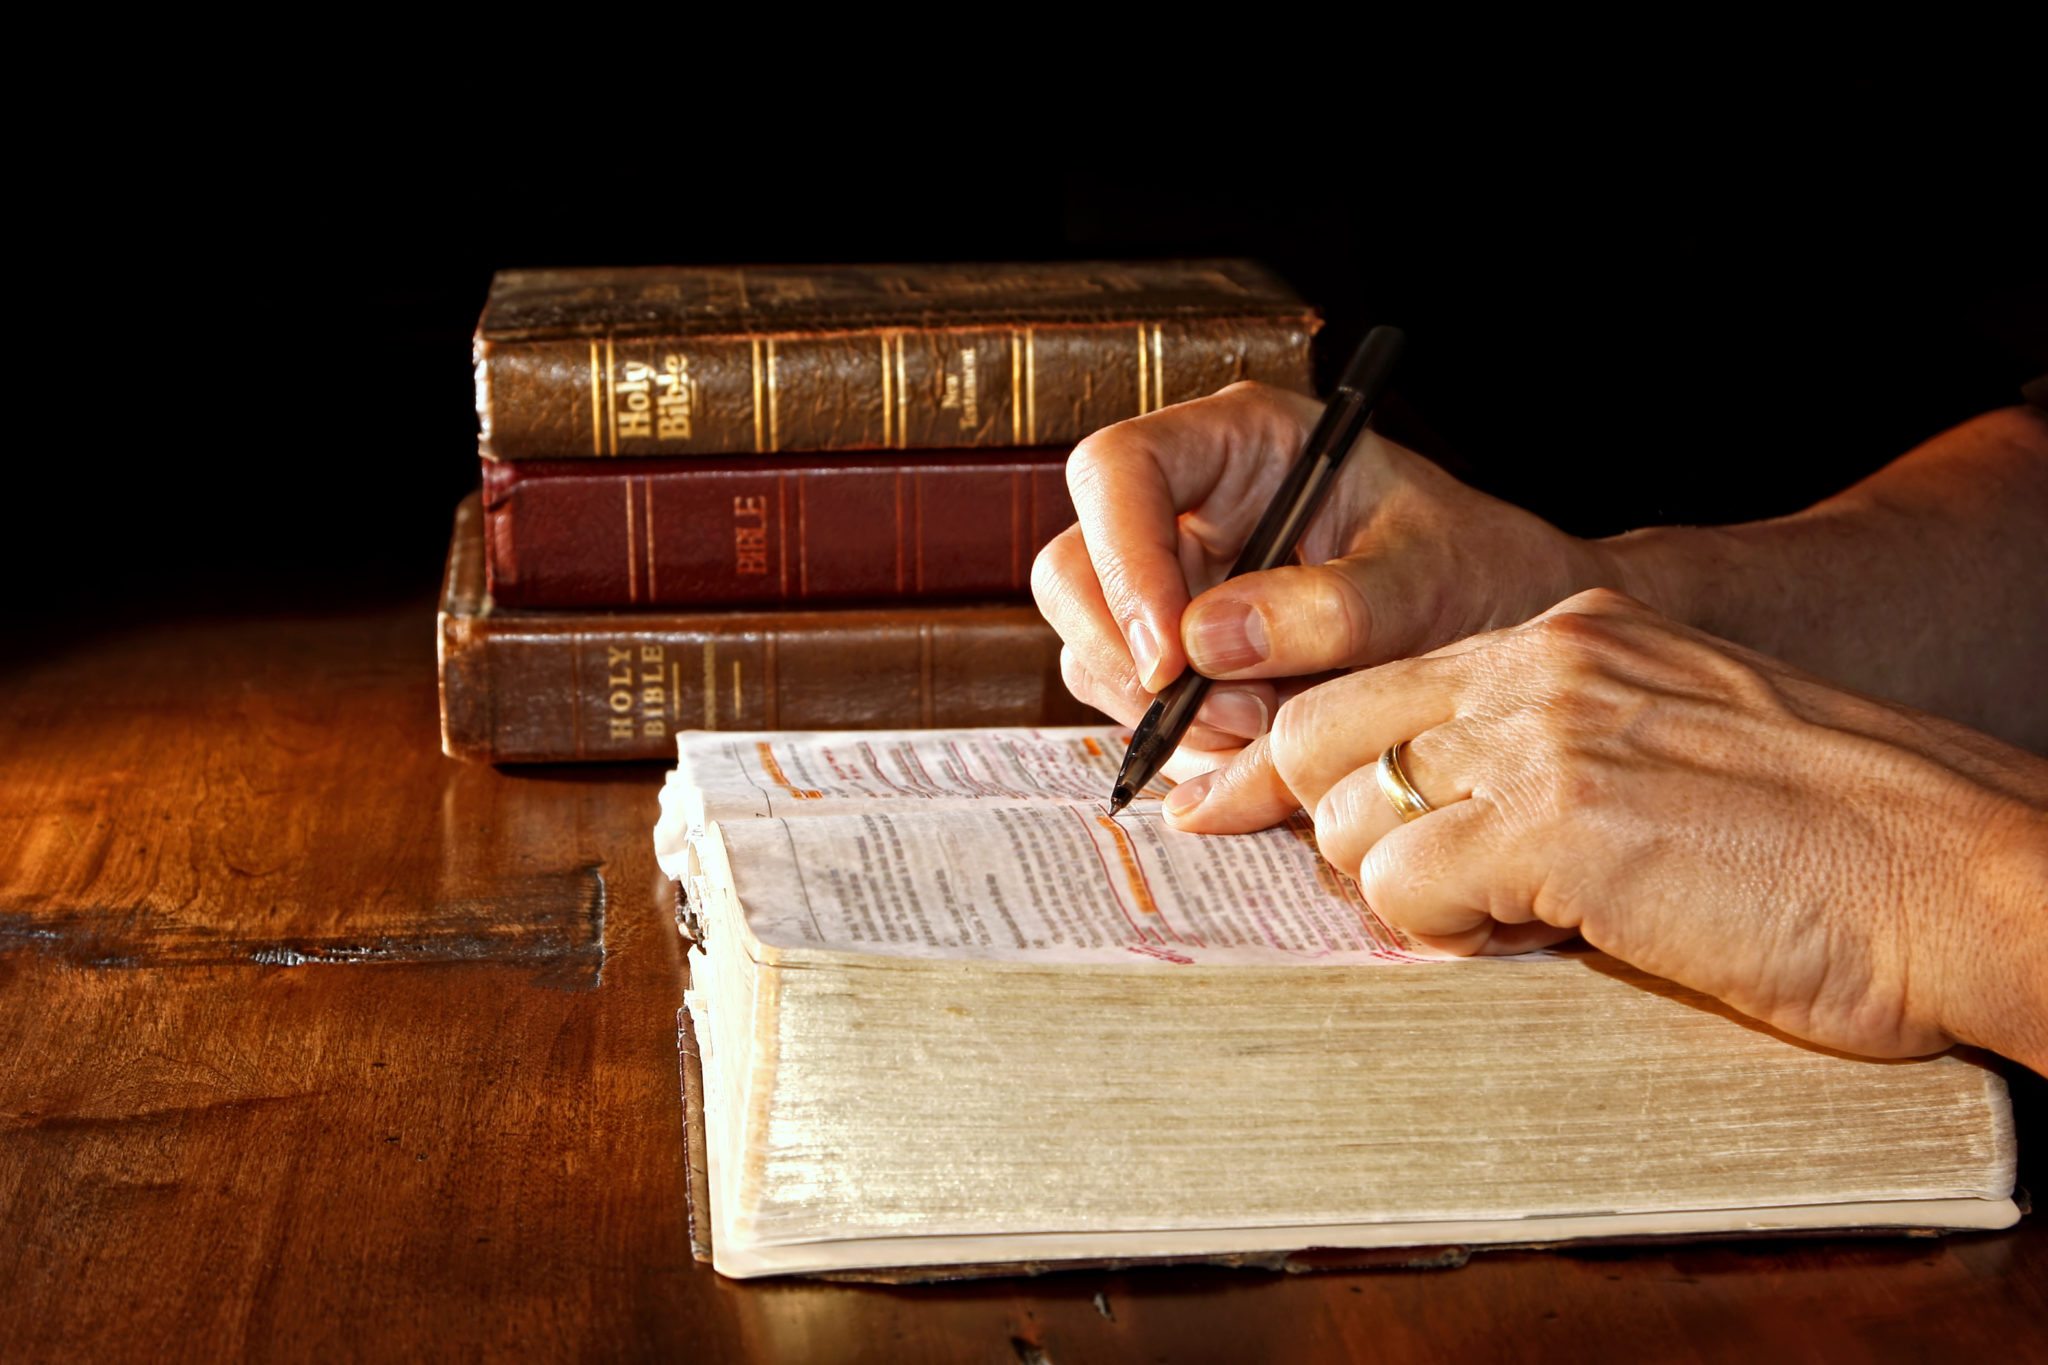 A man uses a pen to help him study an old and worn Holy Bible while other versions and/or translations of the bible are nearby on the wood table.